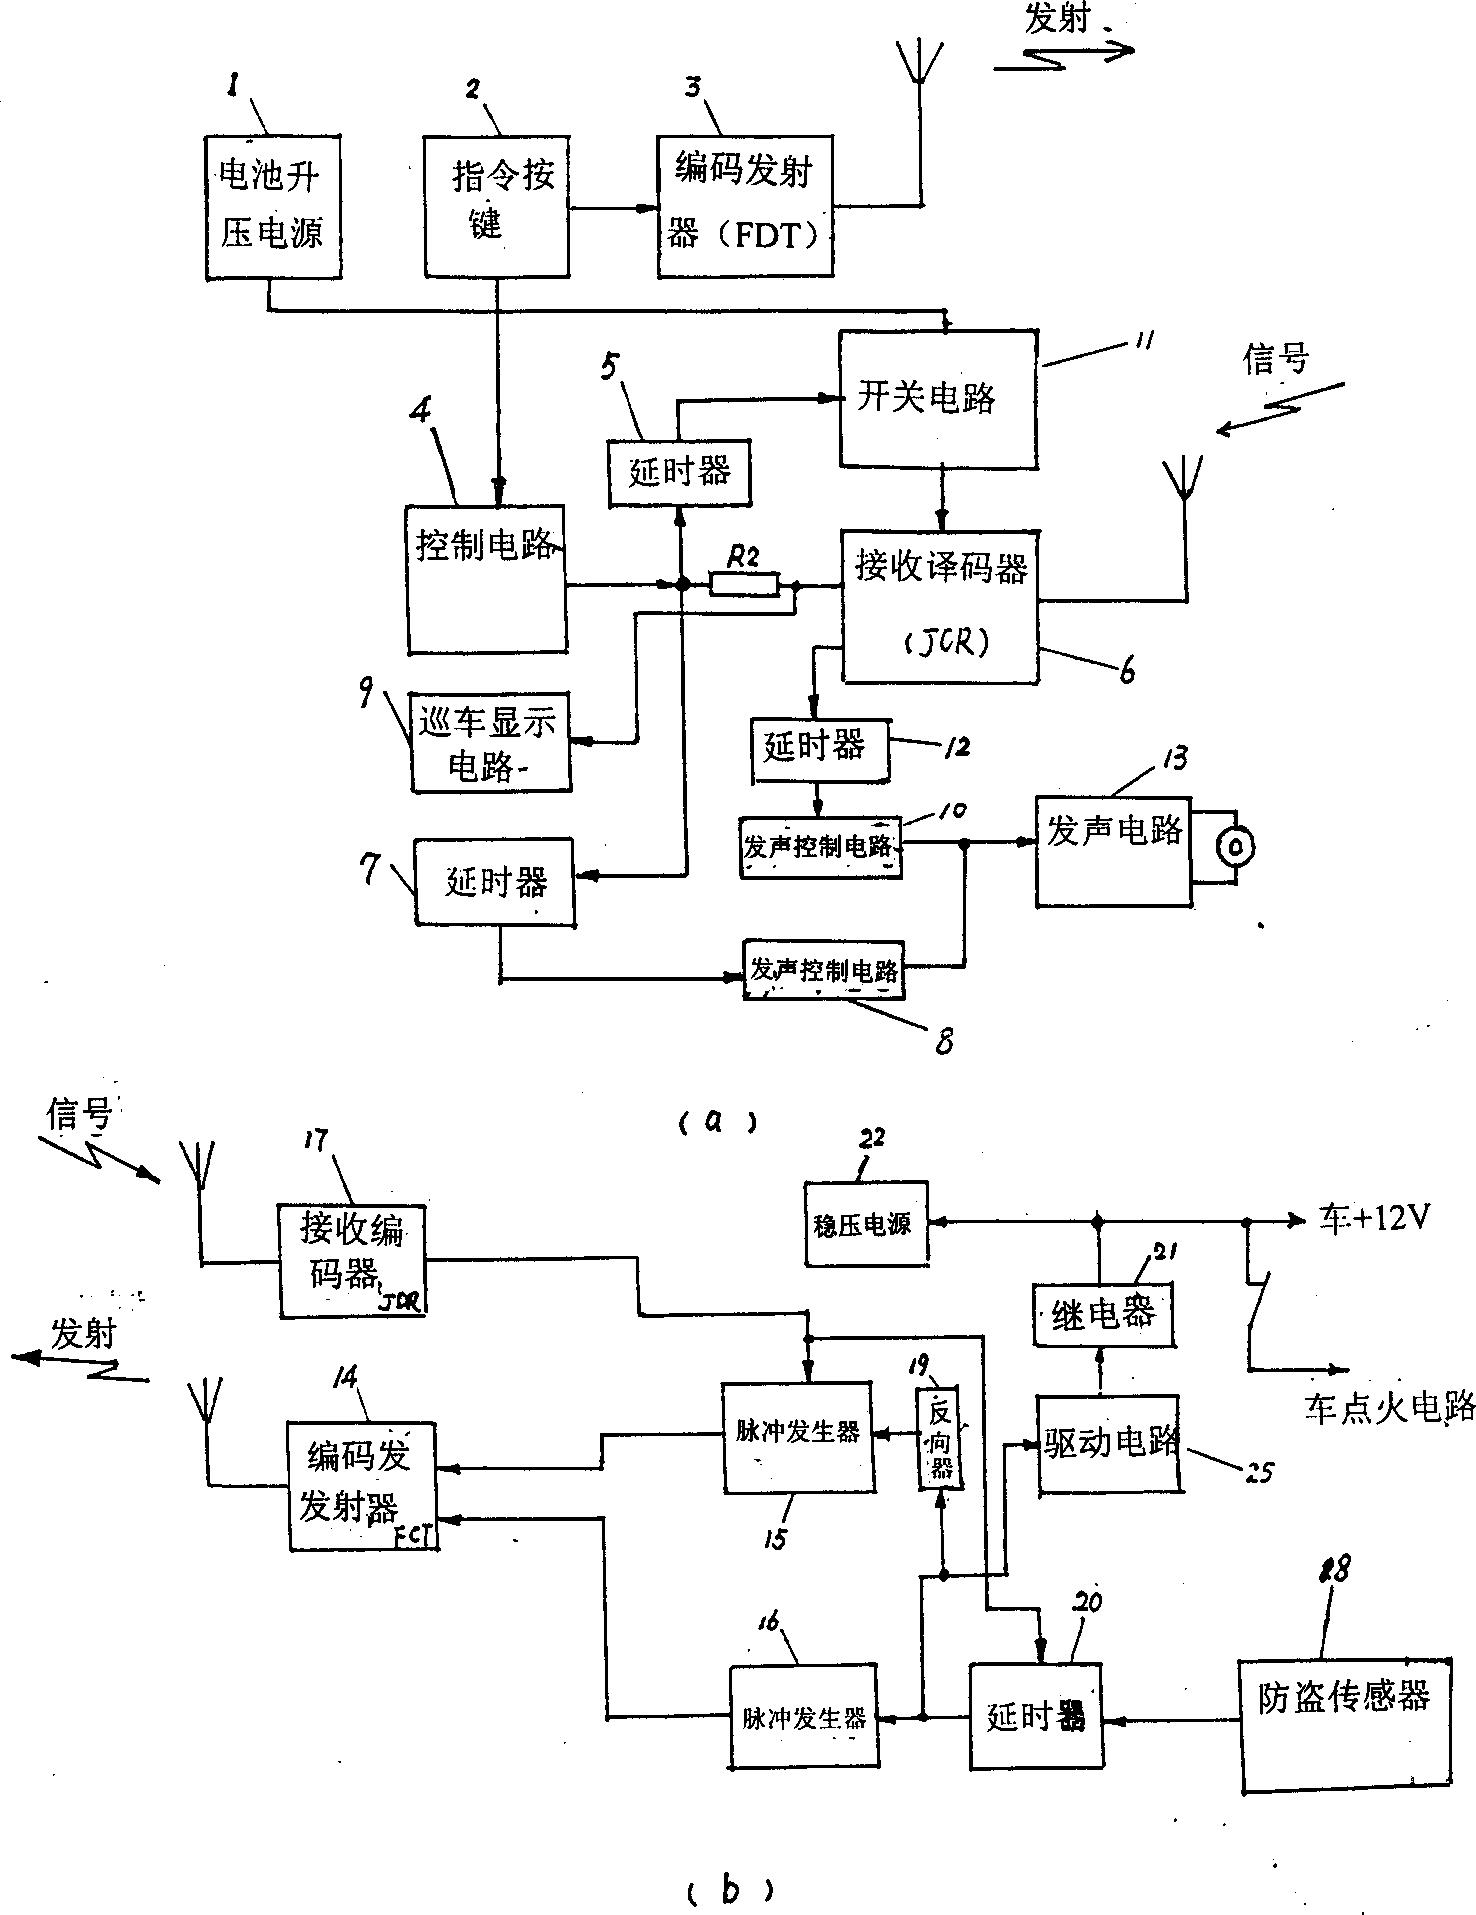 Anti-theft alarm for vehicle and its signal processing method